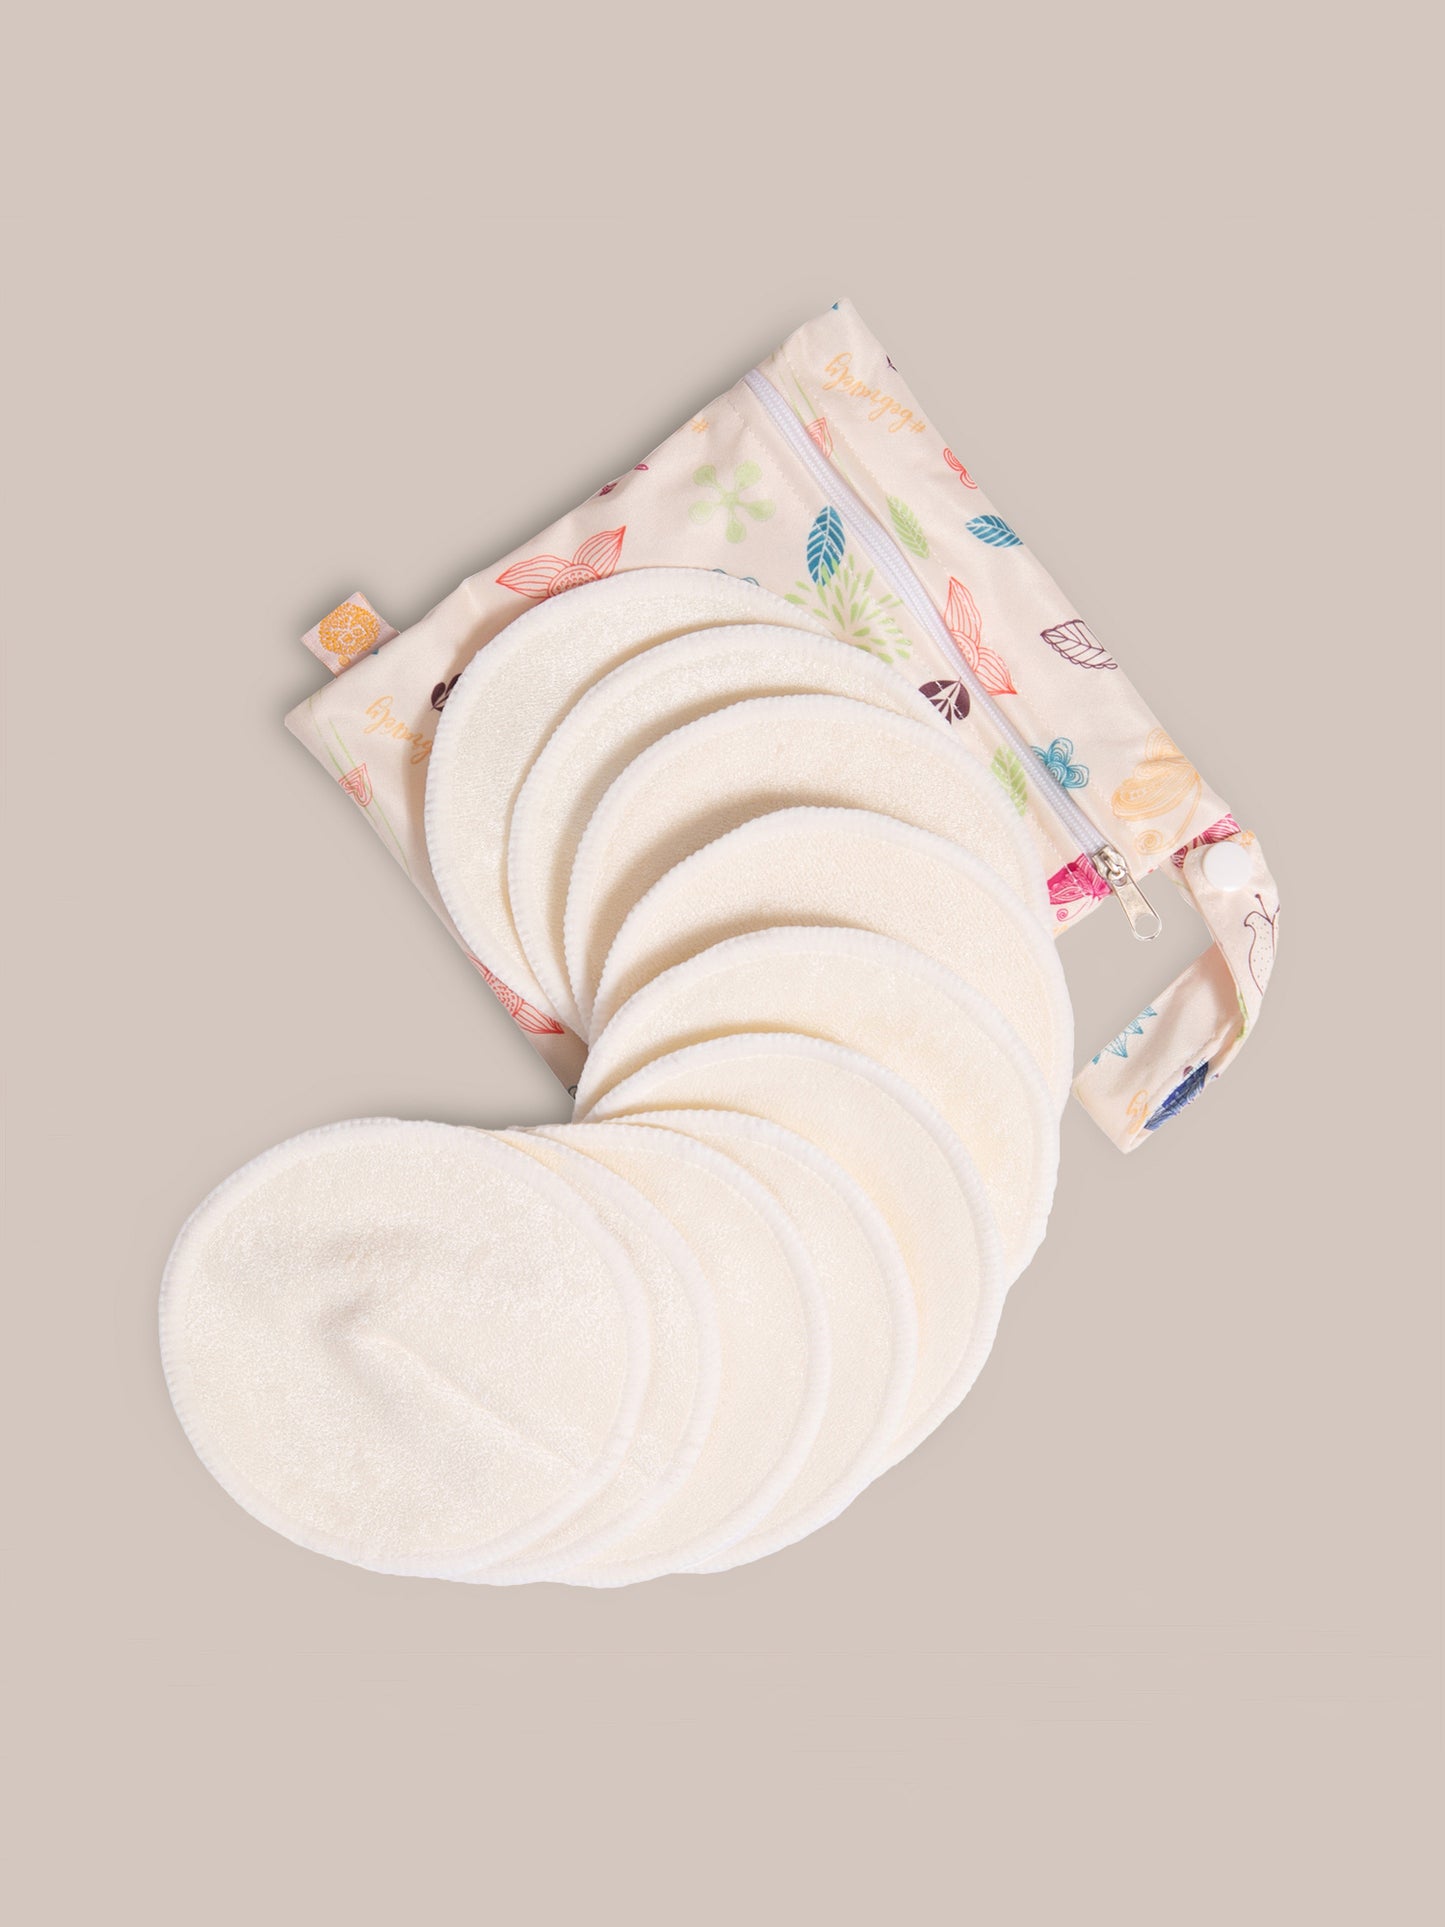 Enovoe Organic Bamboo Breastfeeding Pads (12 Pack) with Laundry